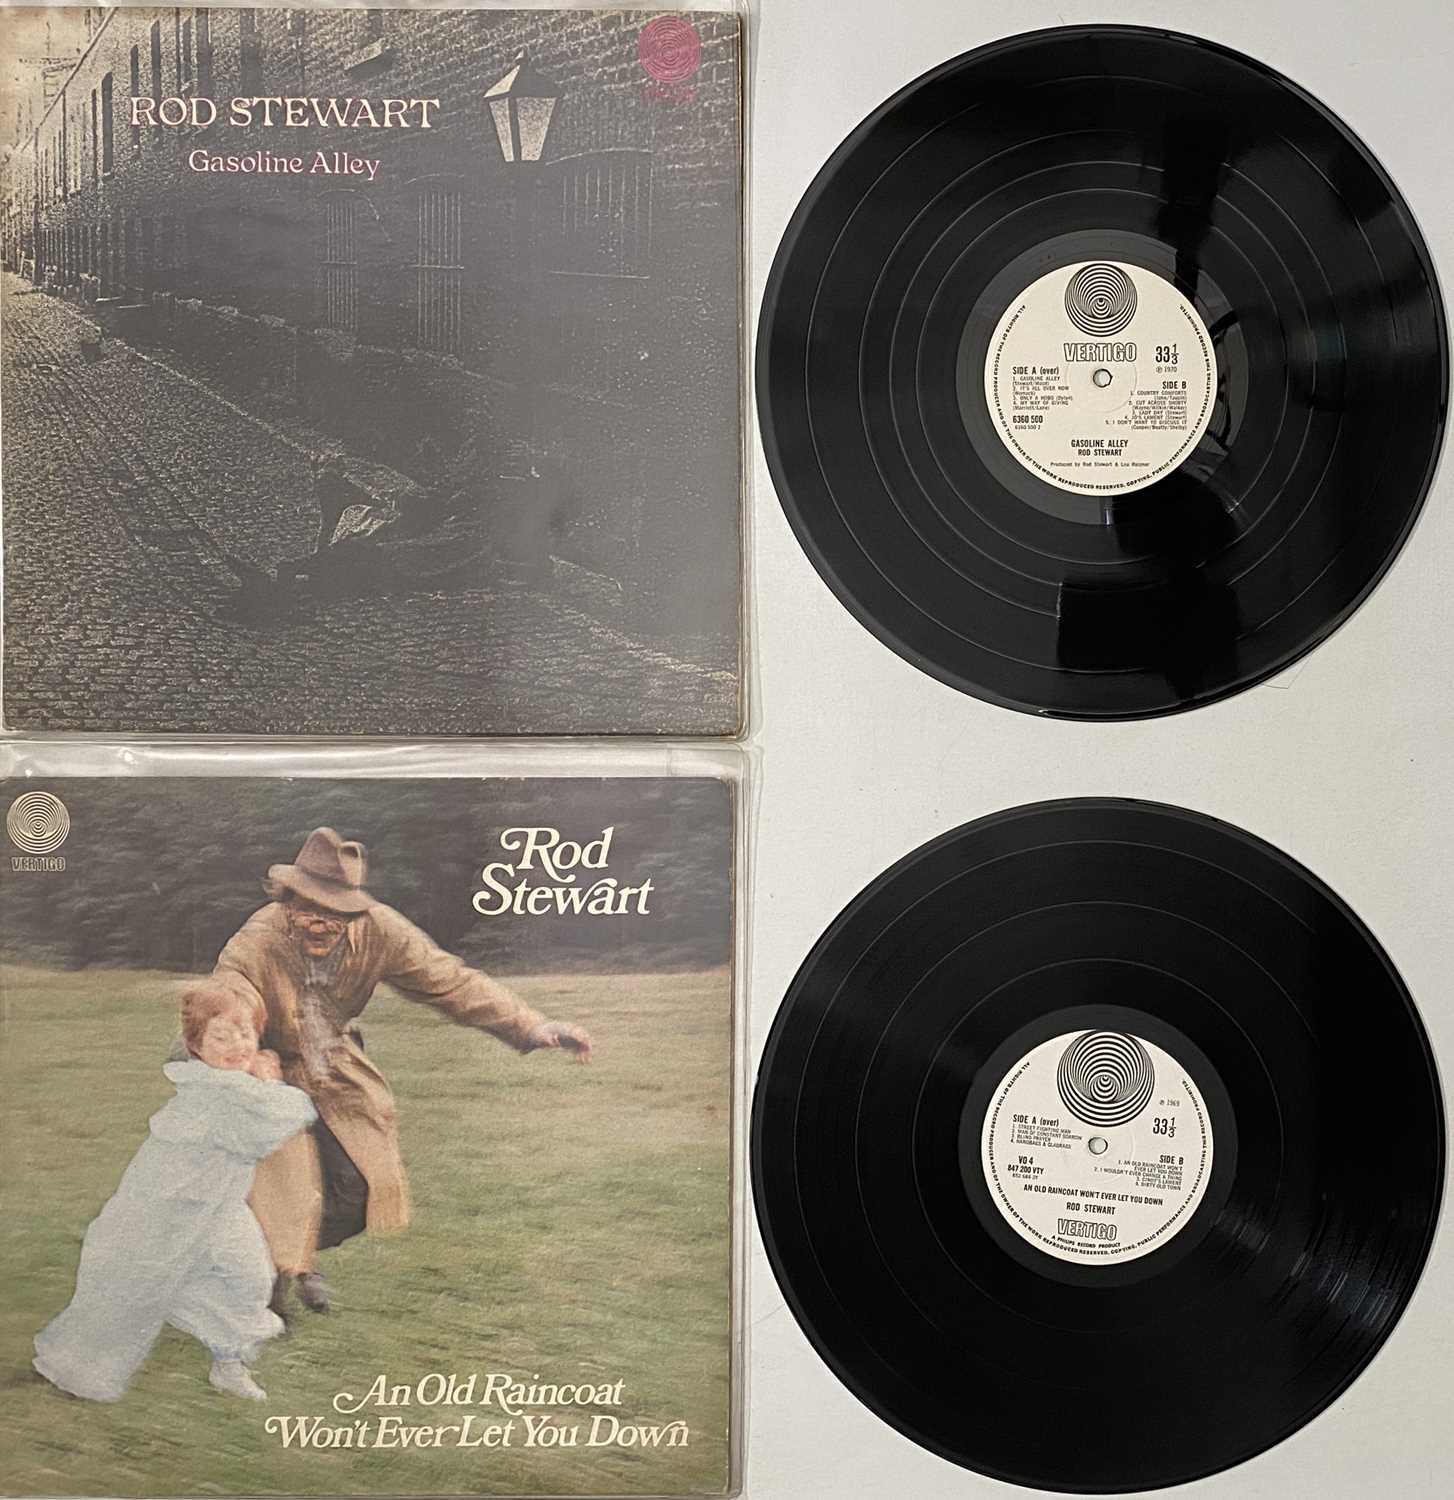 ROD STEWART & RELATED - LPs - Image 2 of 4